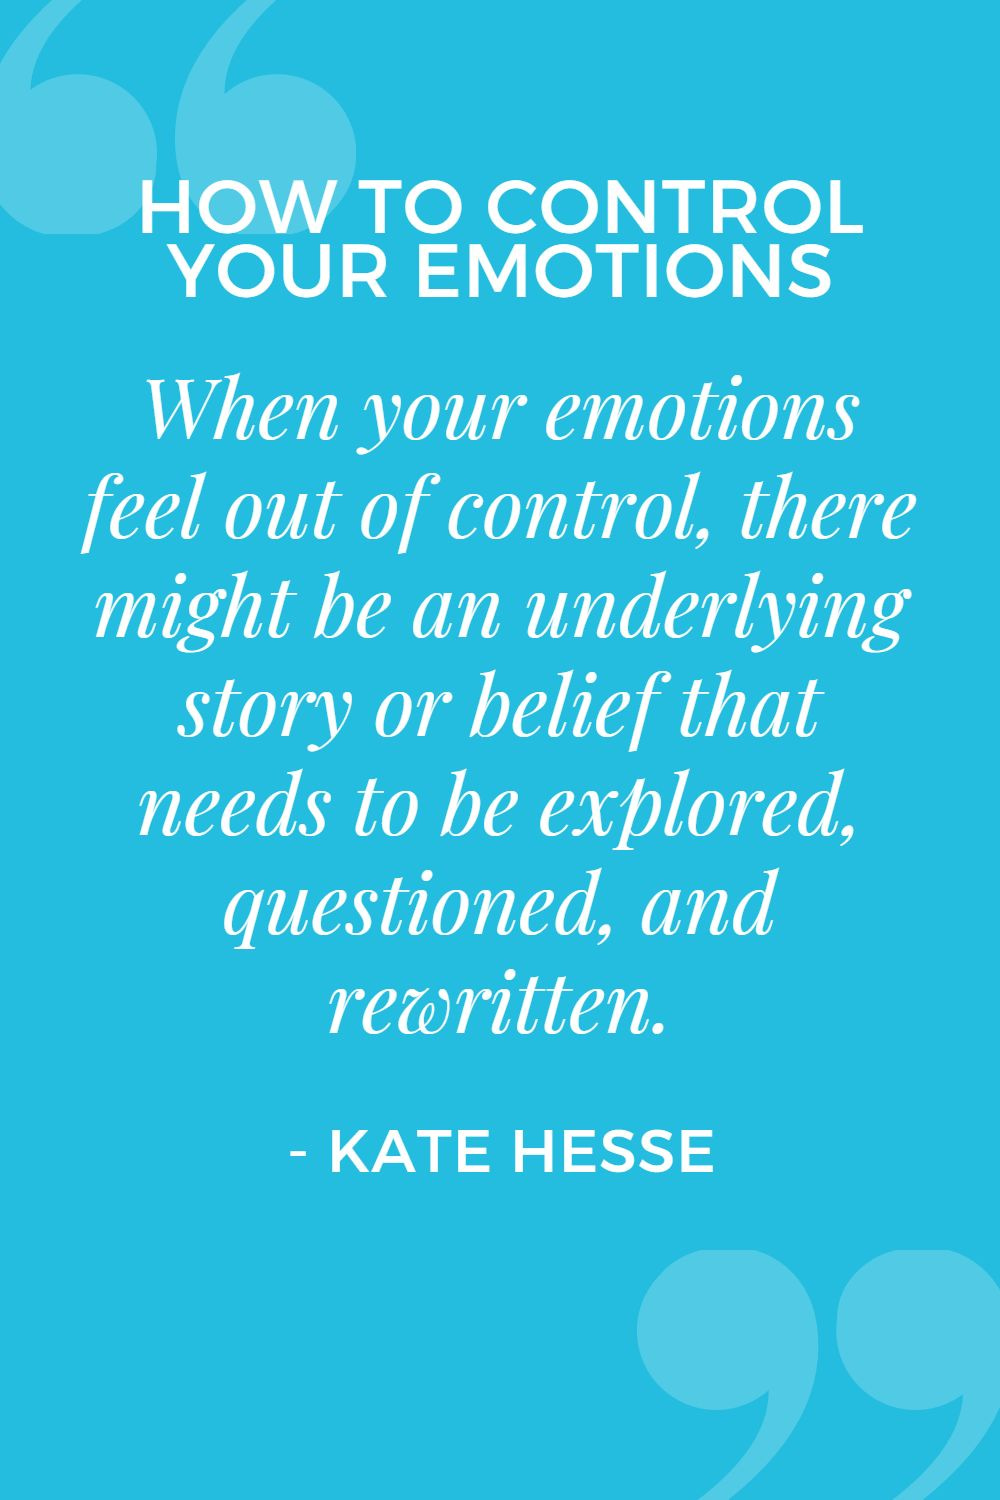 When your emotions feel out of control, there might be an underlying story or belief that needs to be explored, questioned, and rewritten.